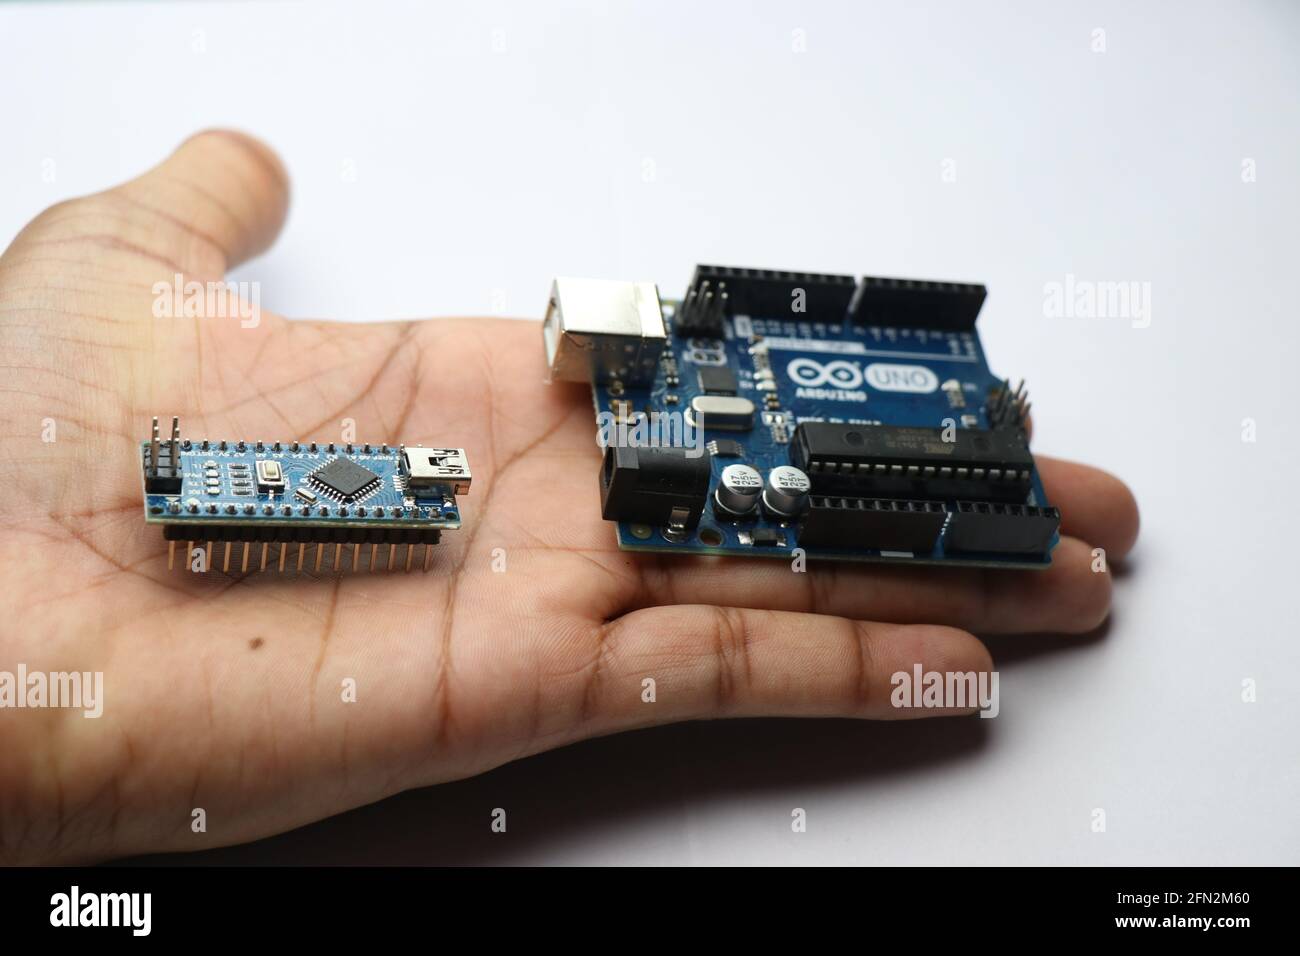 Arduino uno and arduino nano held in hand. Arduino boards used in making creative arduino projects and for education Stock Photo